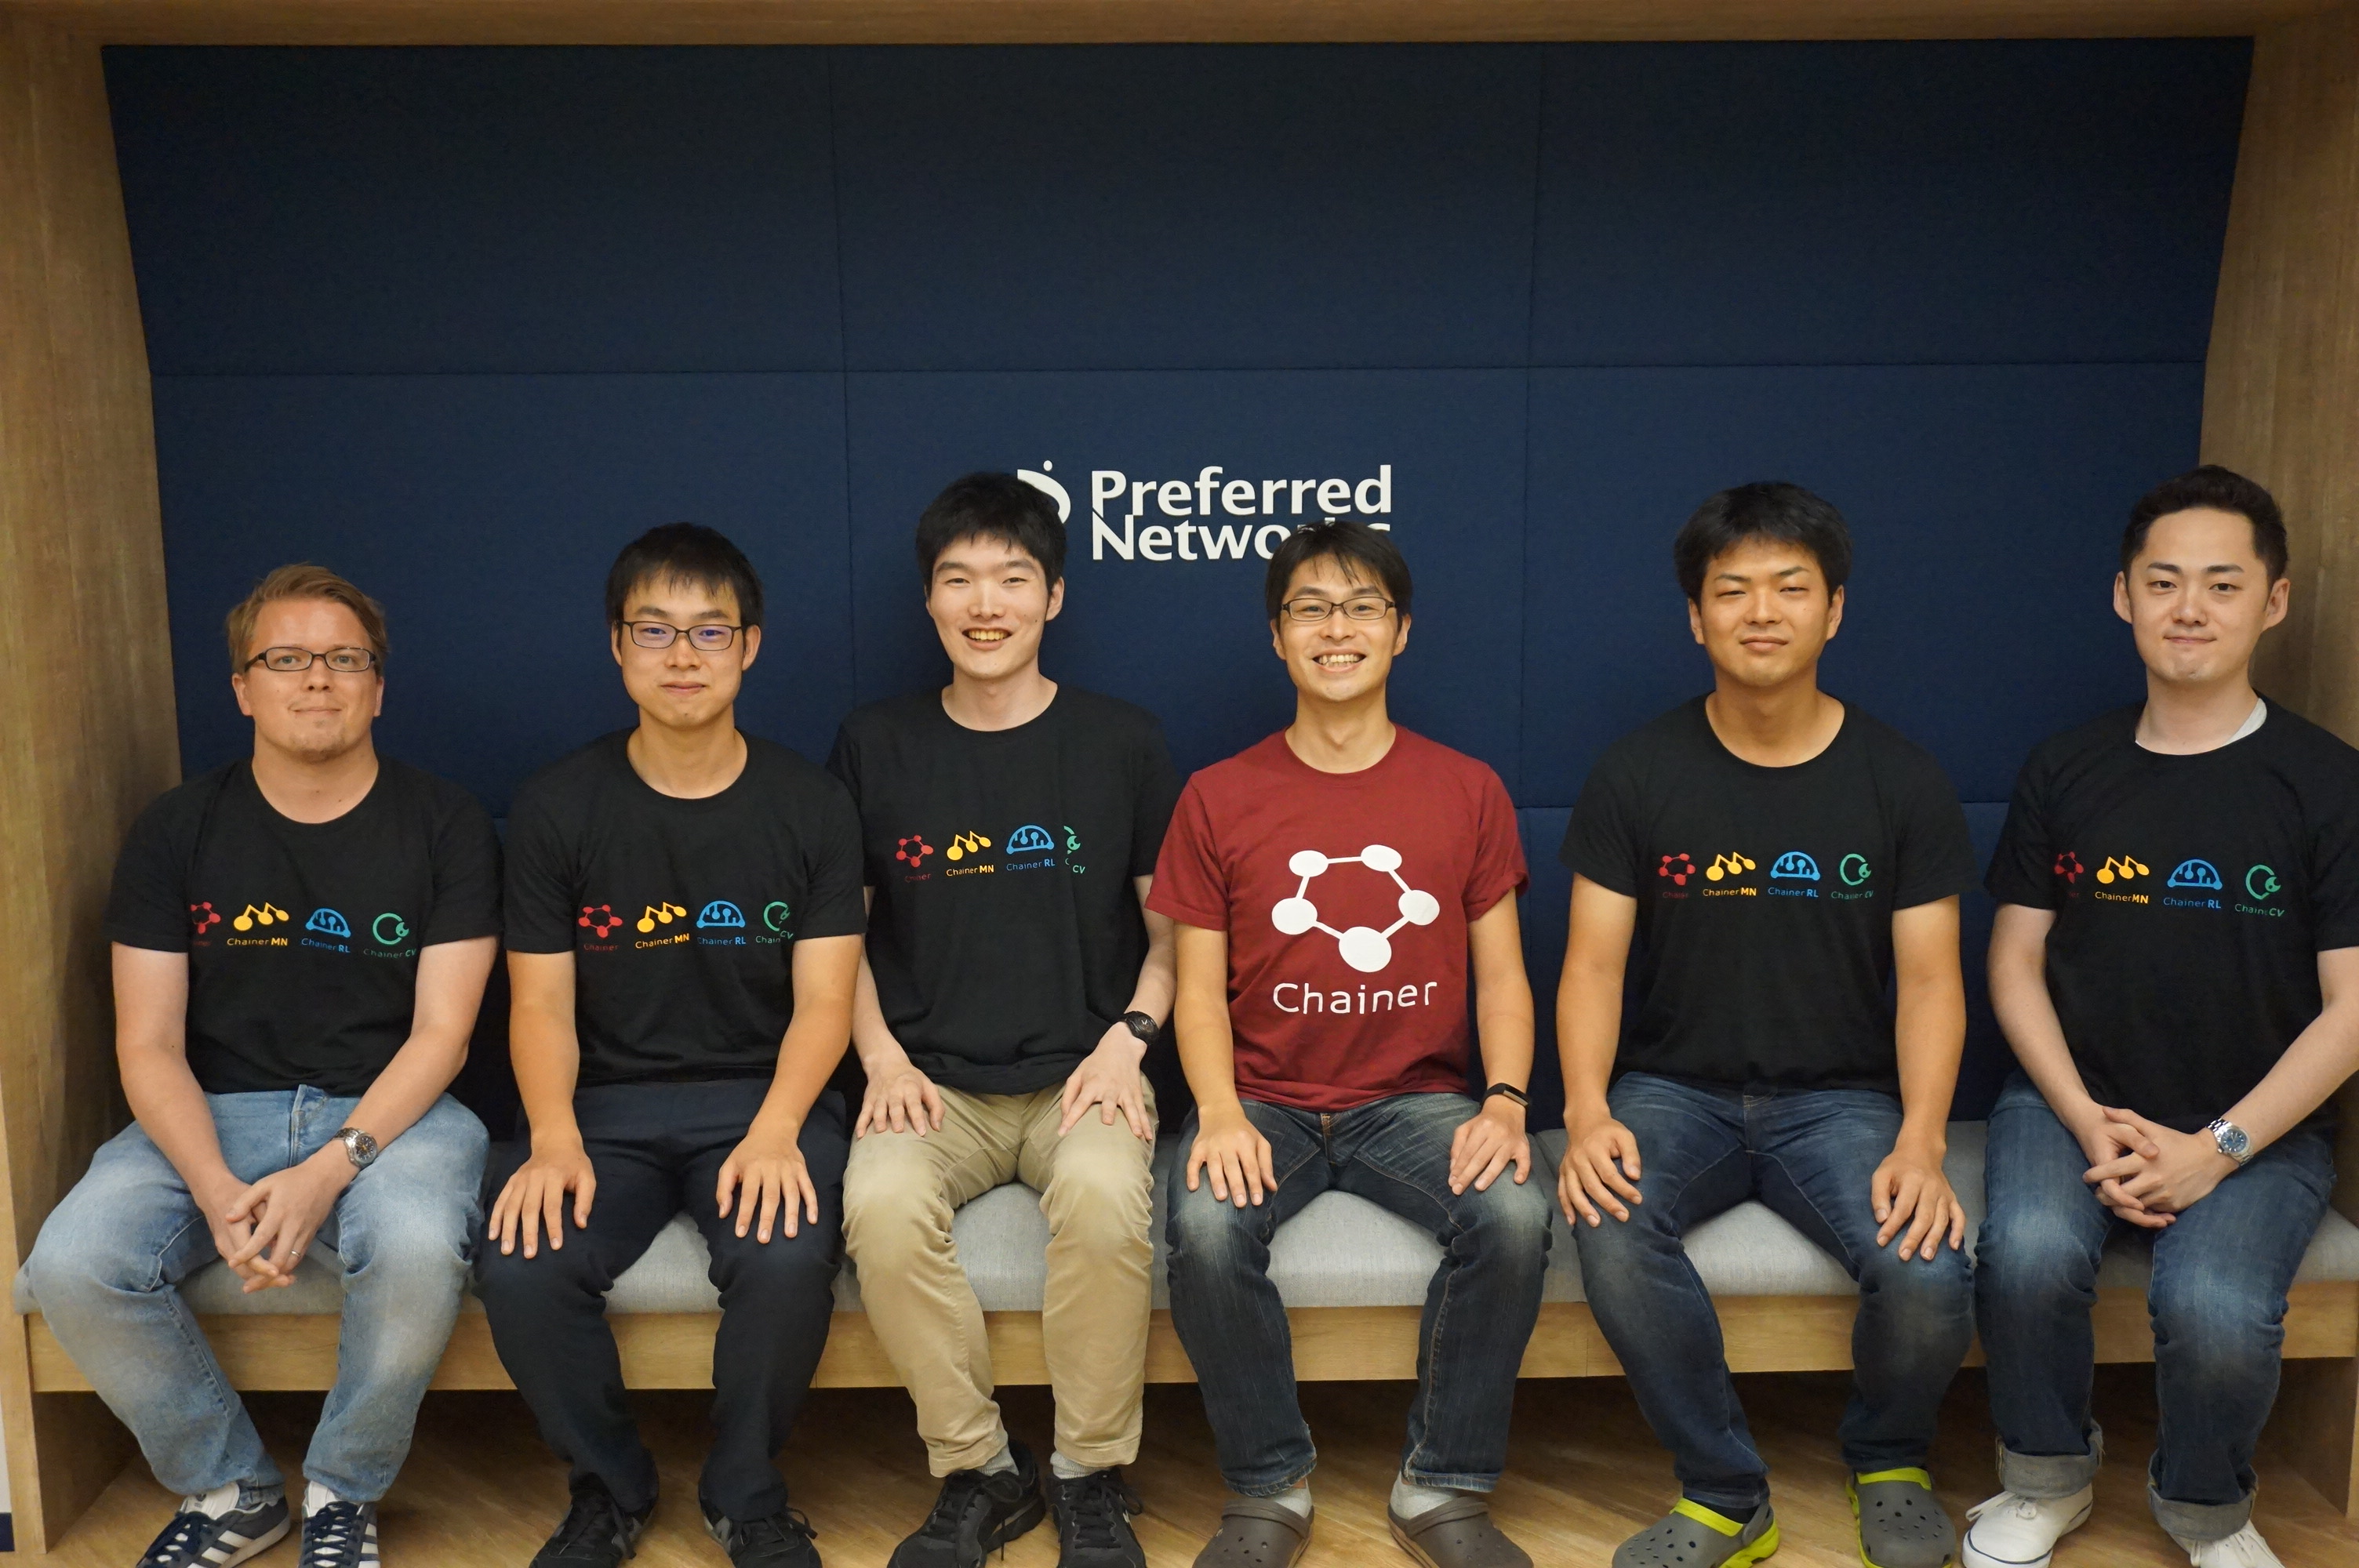 Team PFDet won the 2nd place in the Kaggle Open Images Challenge 2018